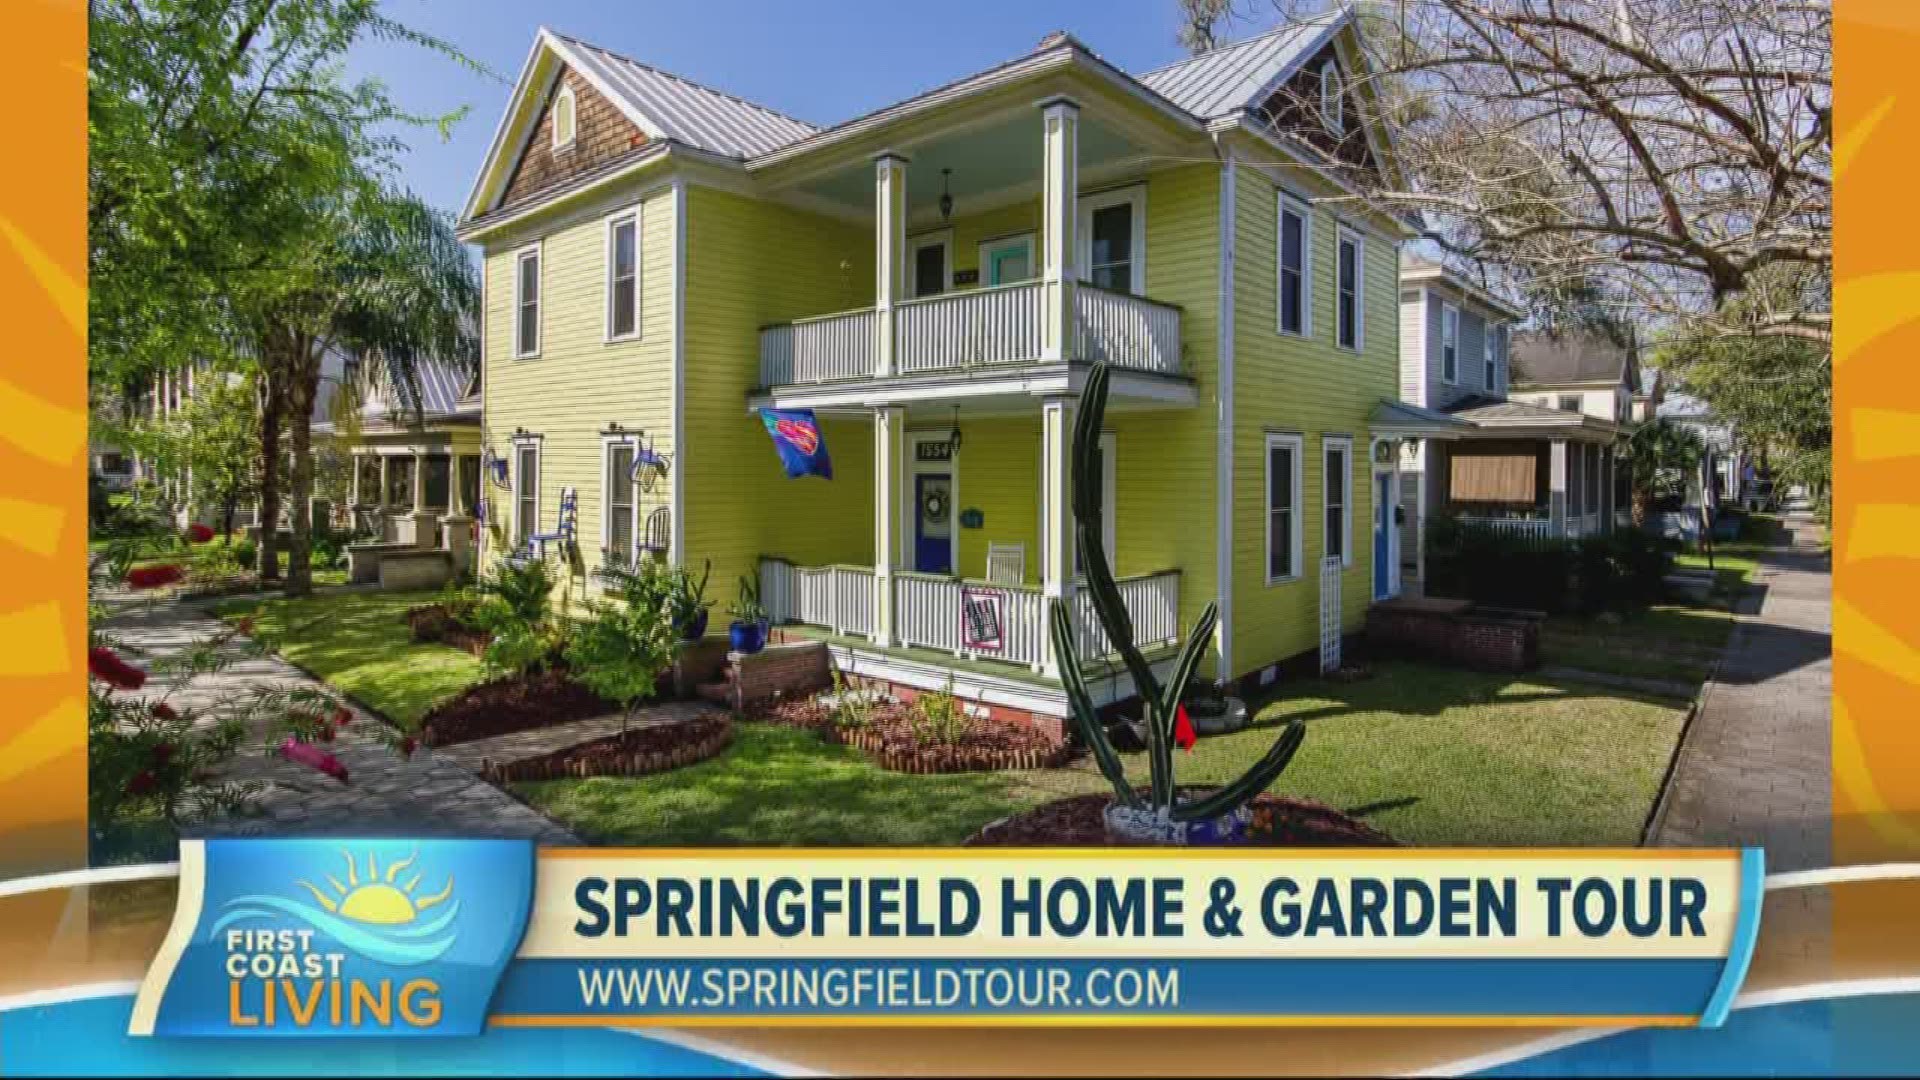 Get a tour of some of the most historic homes during the 41st Annual Springfield Home and Garden tour.